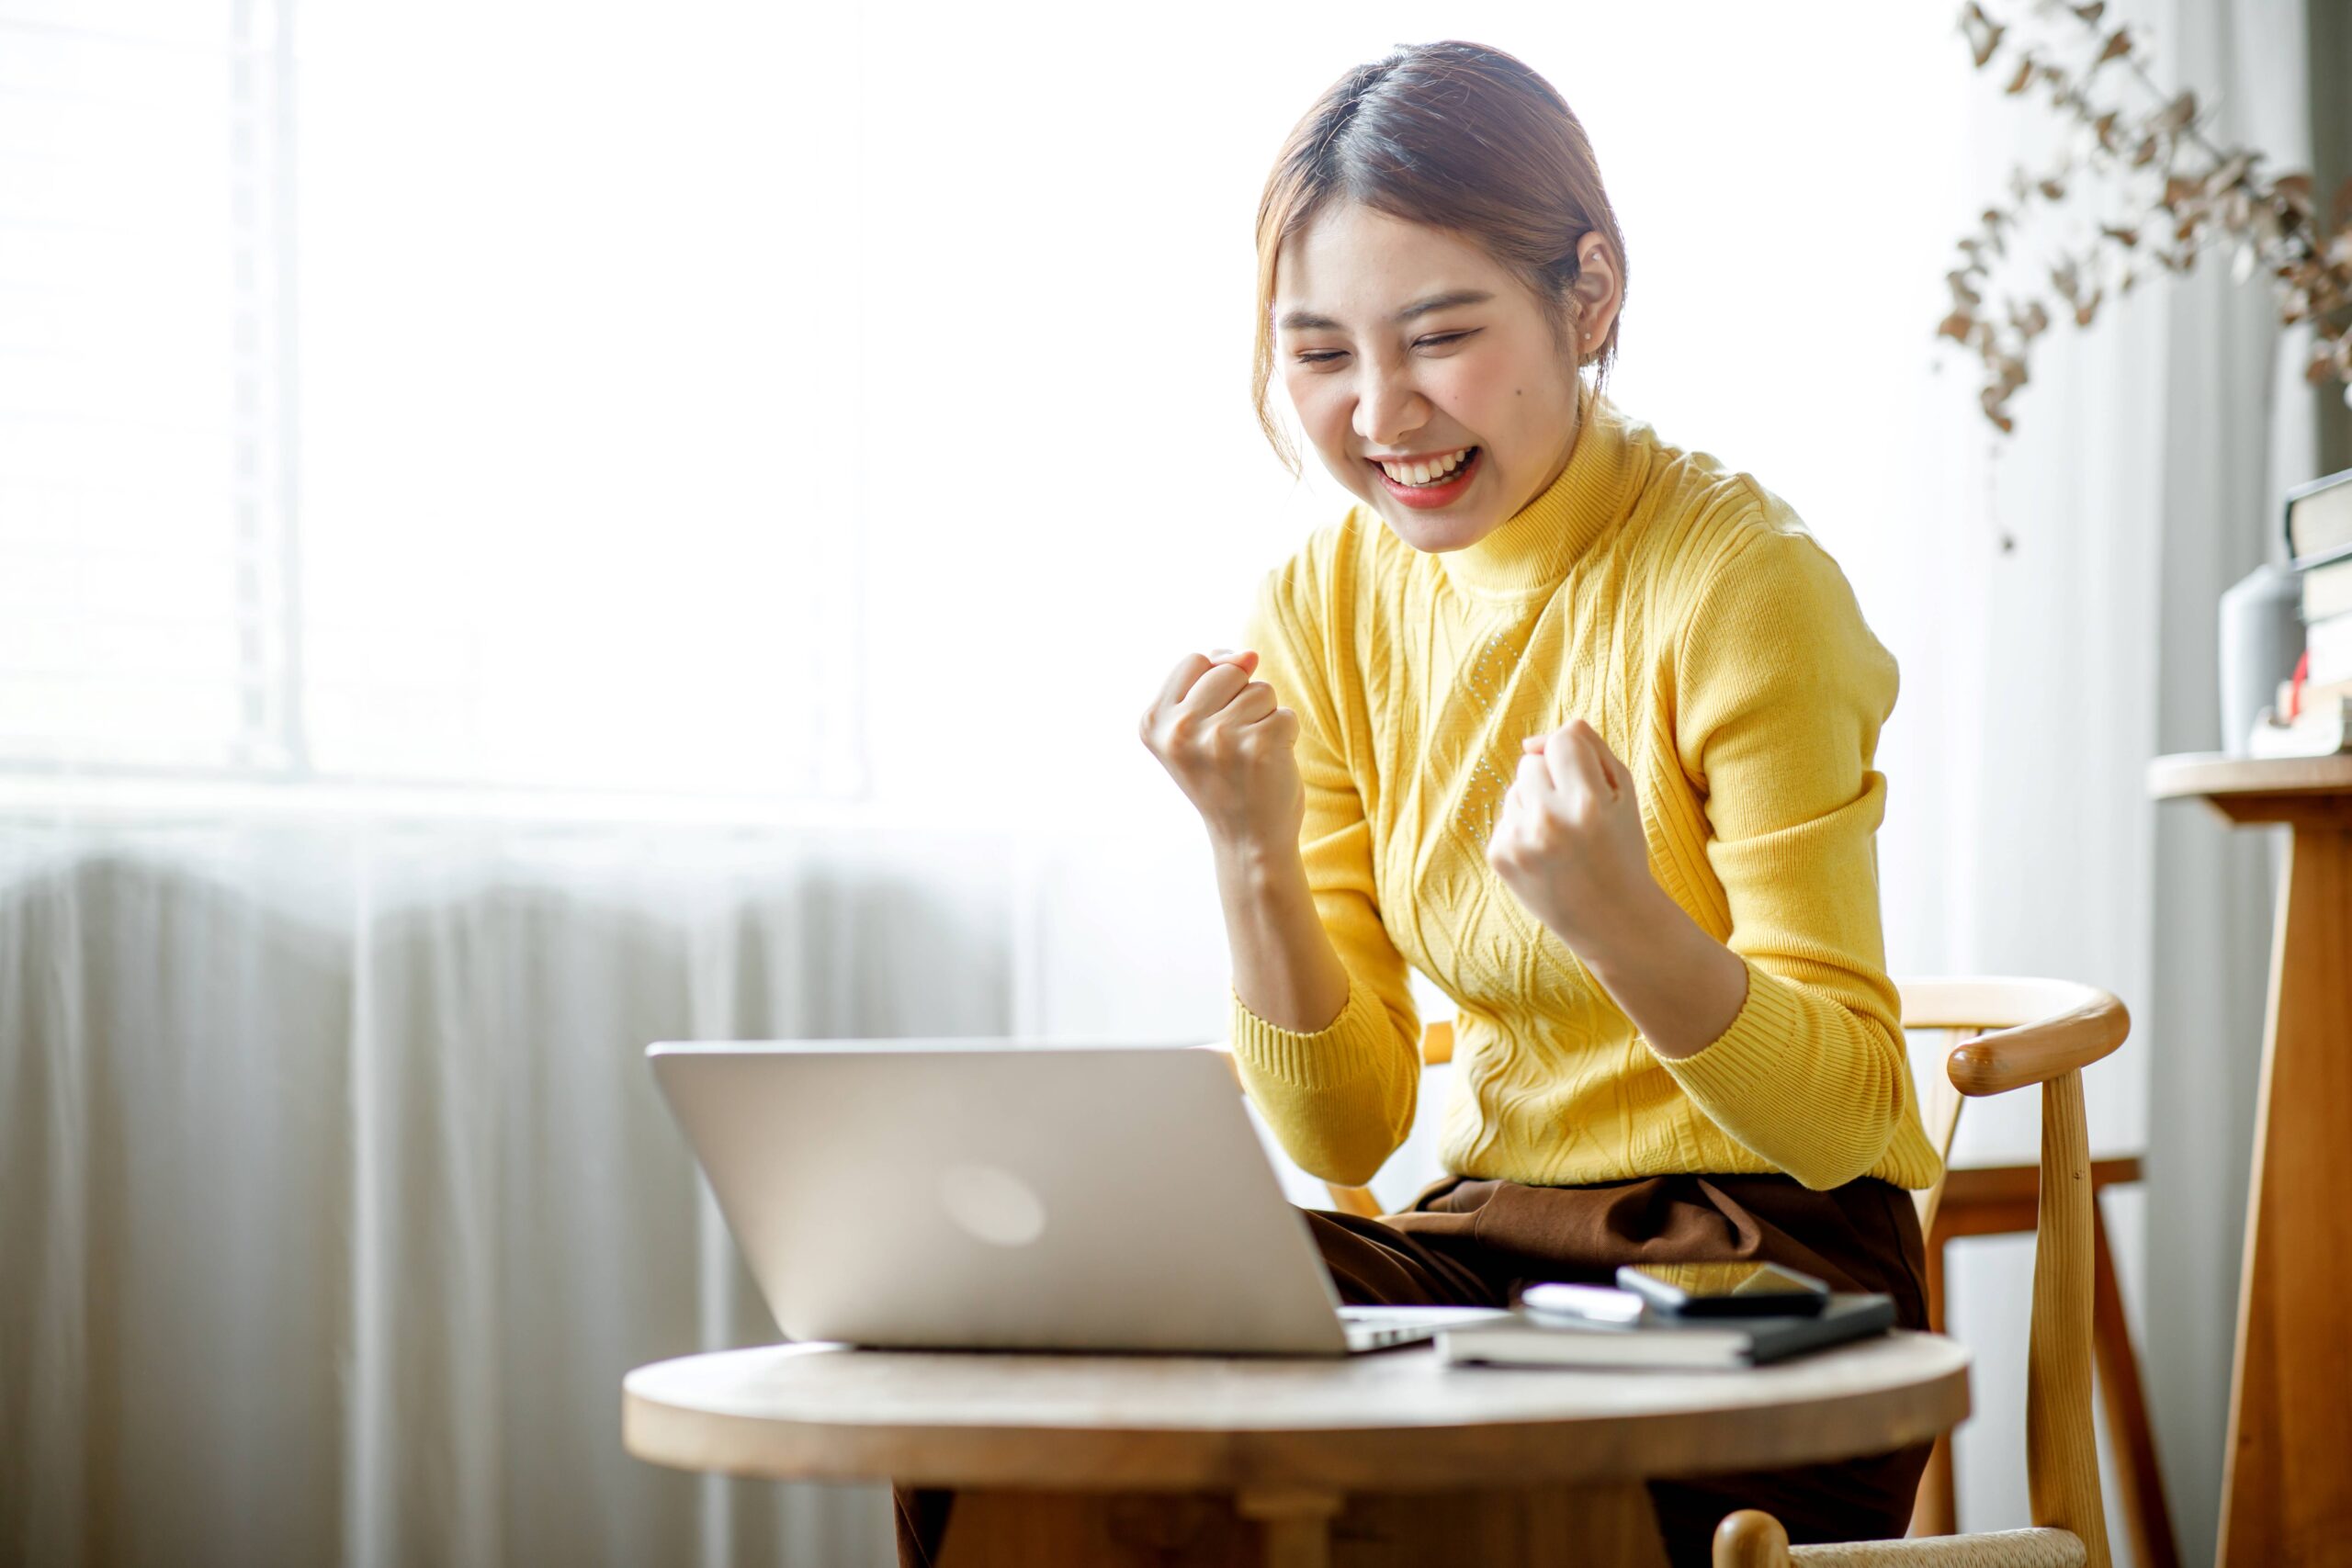 A smiling young woman clenches her fists in triumph while looking at her laptop.